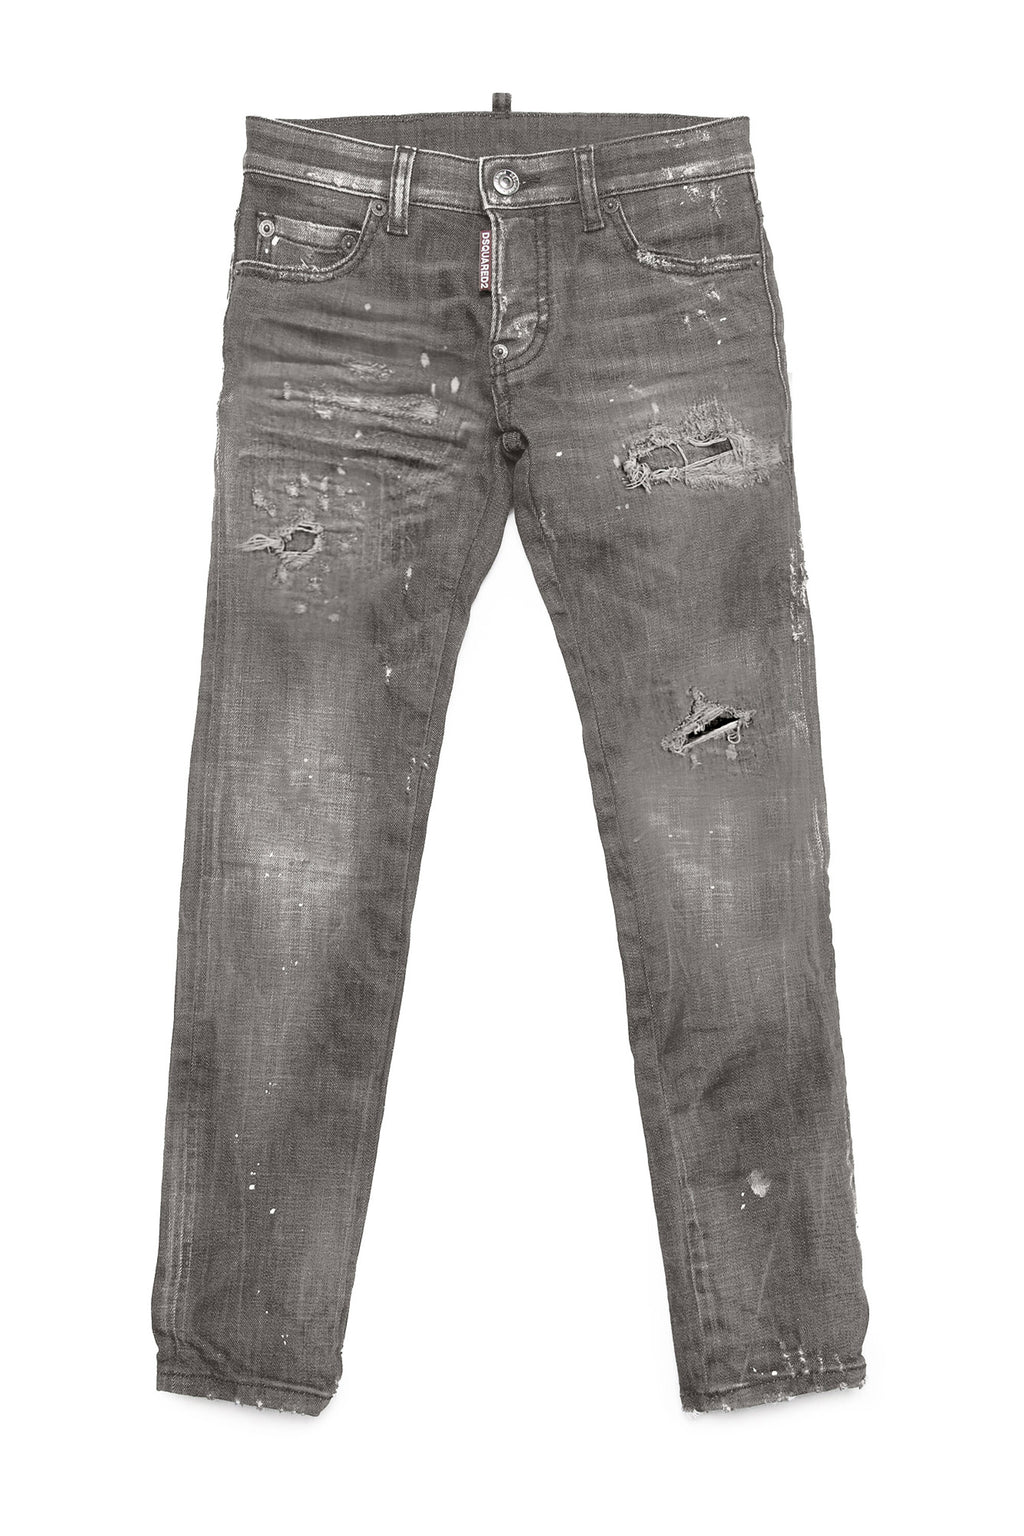 Slim straight gray jeans shaded with abrasions and stains